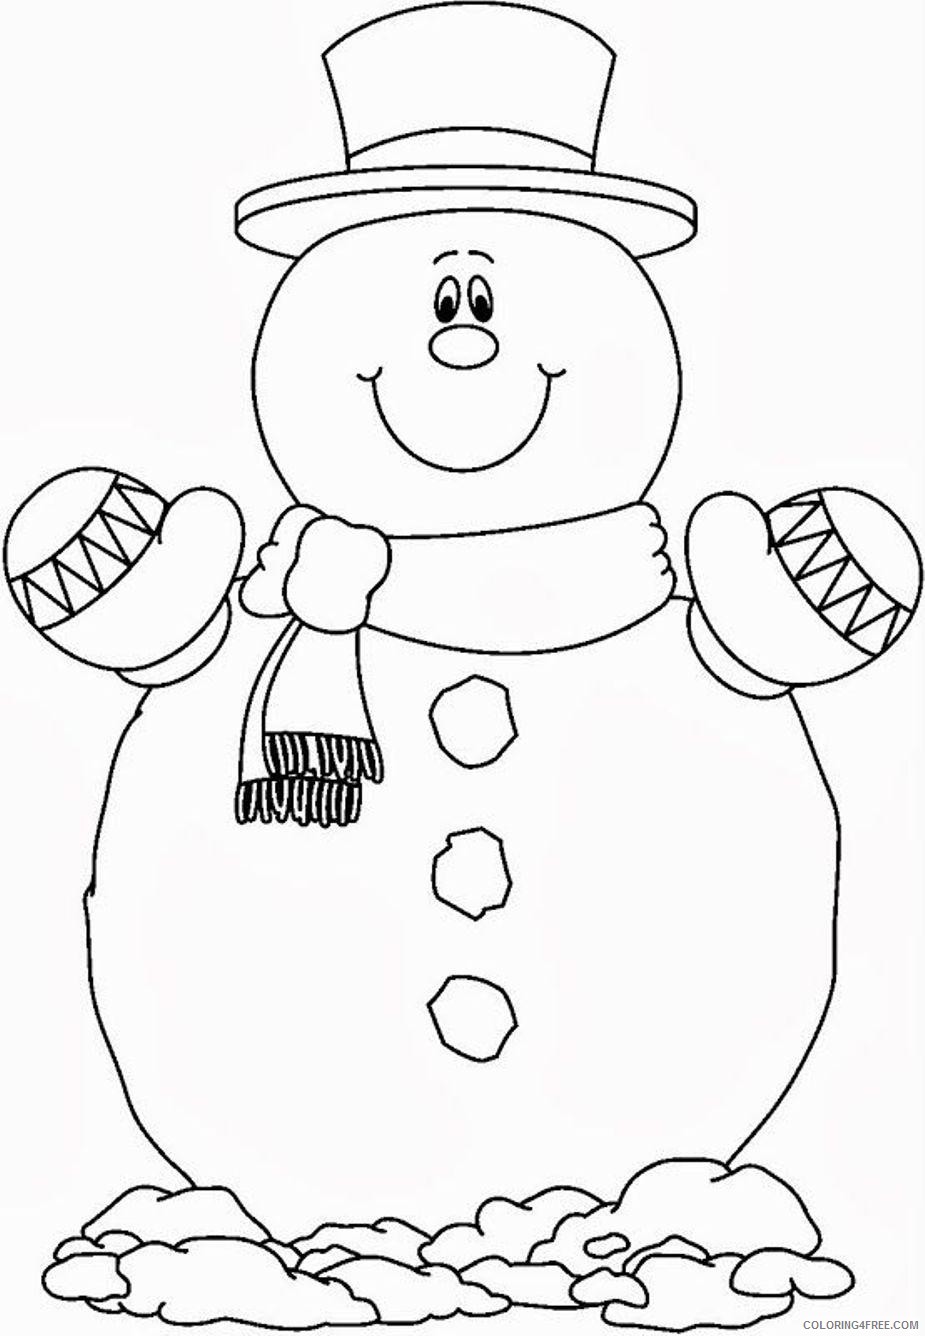 snowman coloring pages smiling Coloring4free